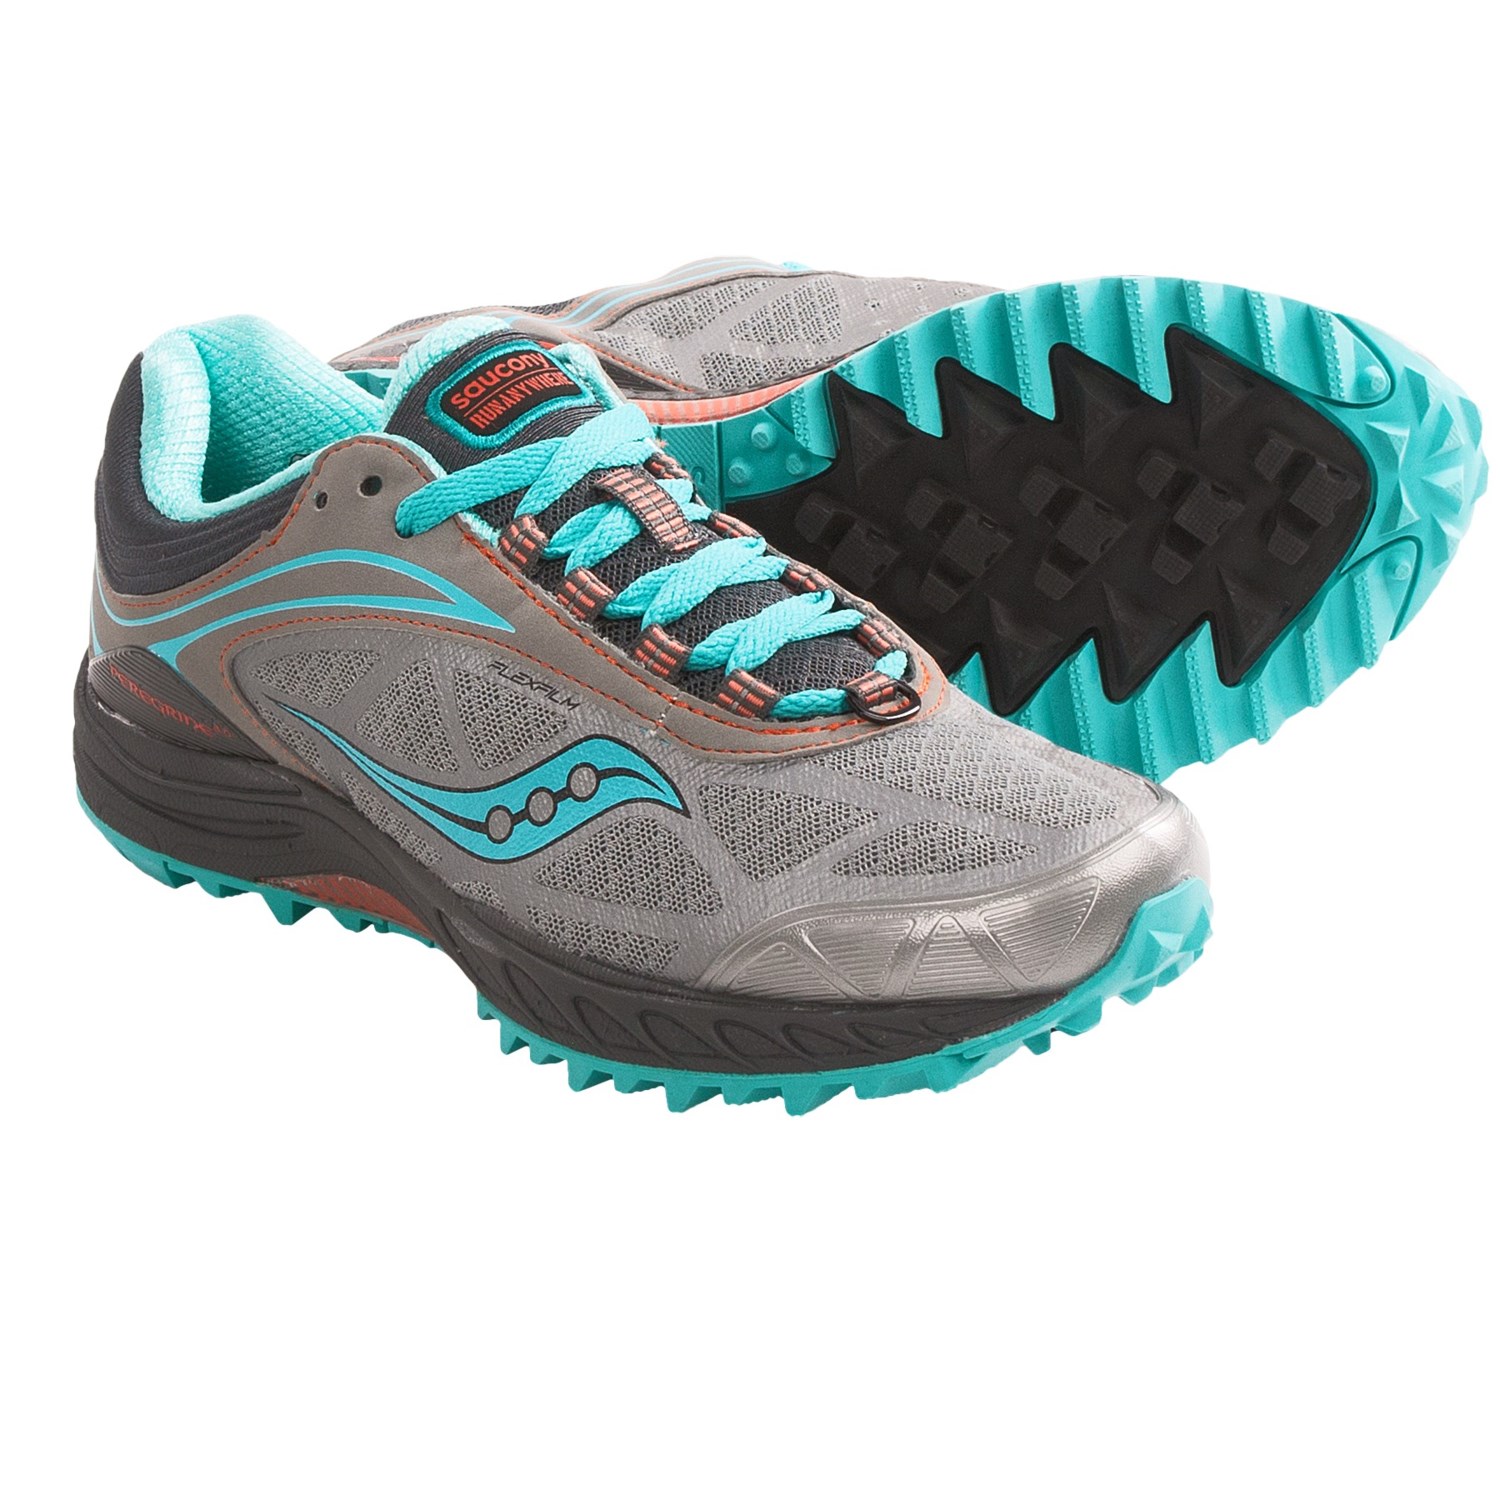 Saucony ProGrid Peregrine 3 Trail Running Shoes (For Women) - Save 31%